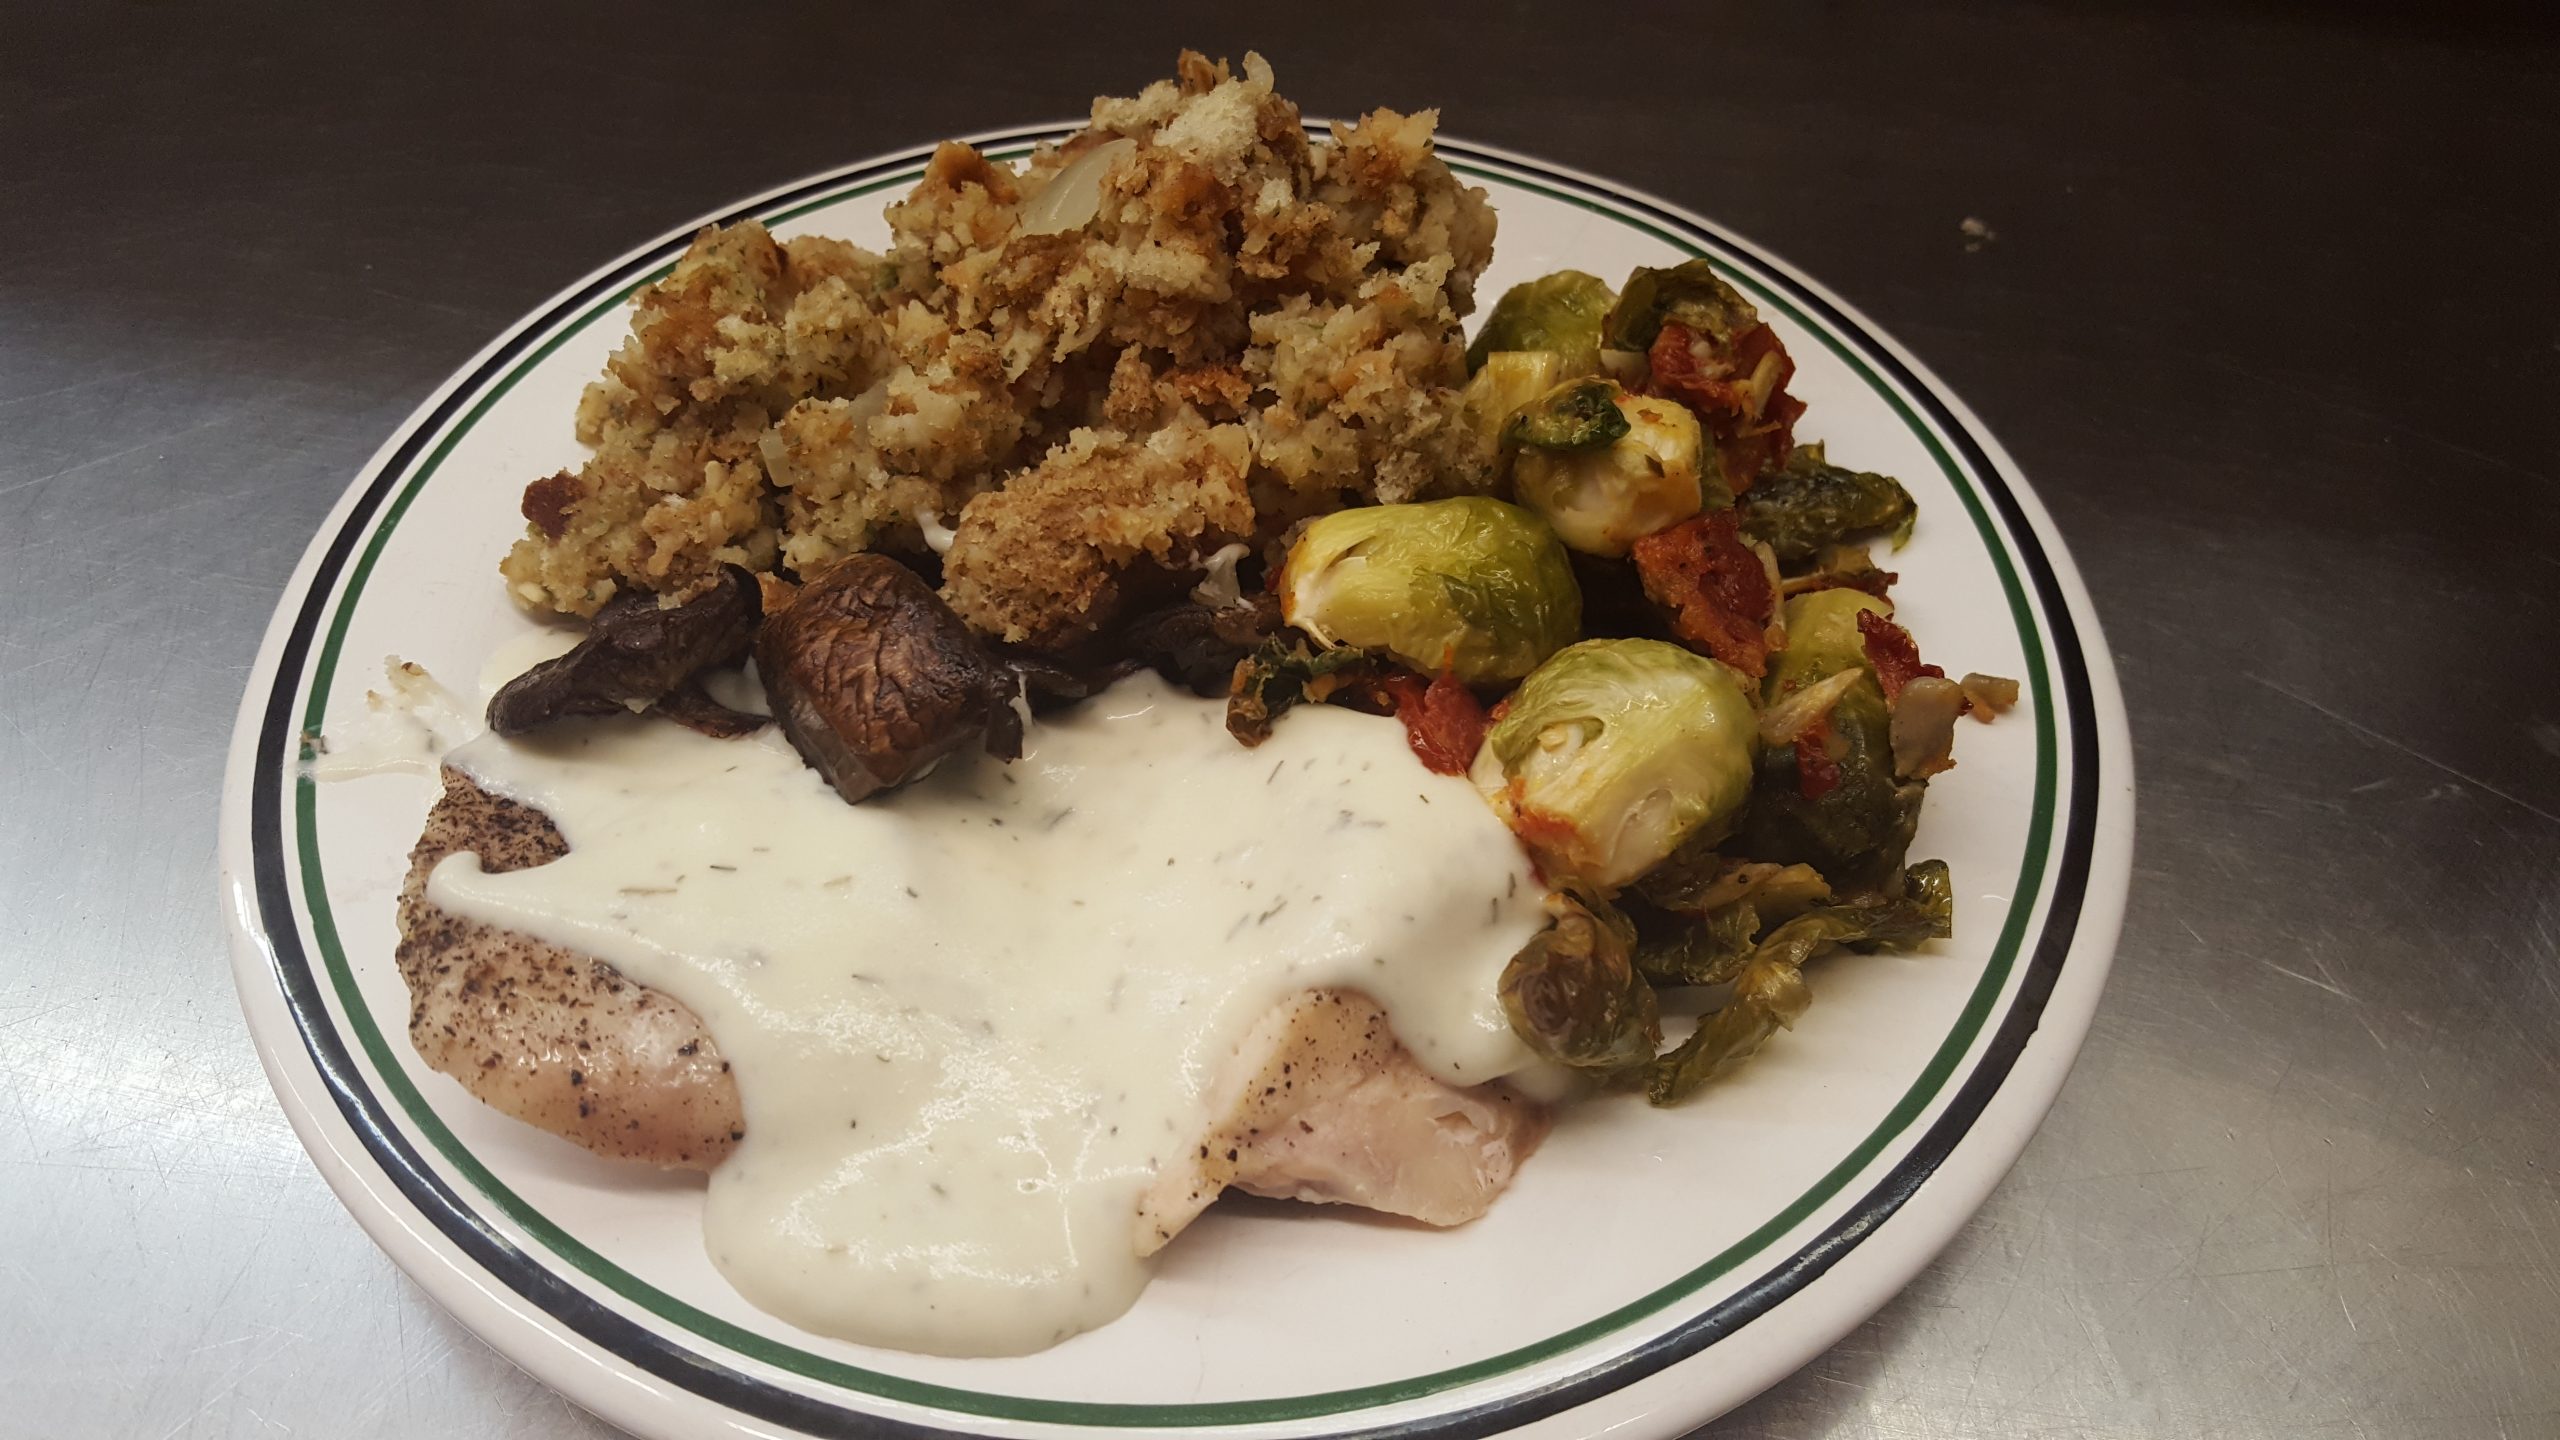 Grilled Chicken with Havarti Dill Cream Sauce, Roasted Brussel Sprouts and Stuffing